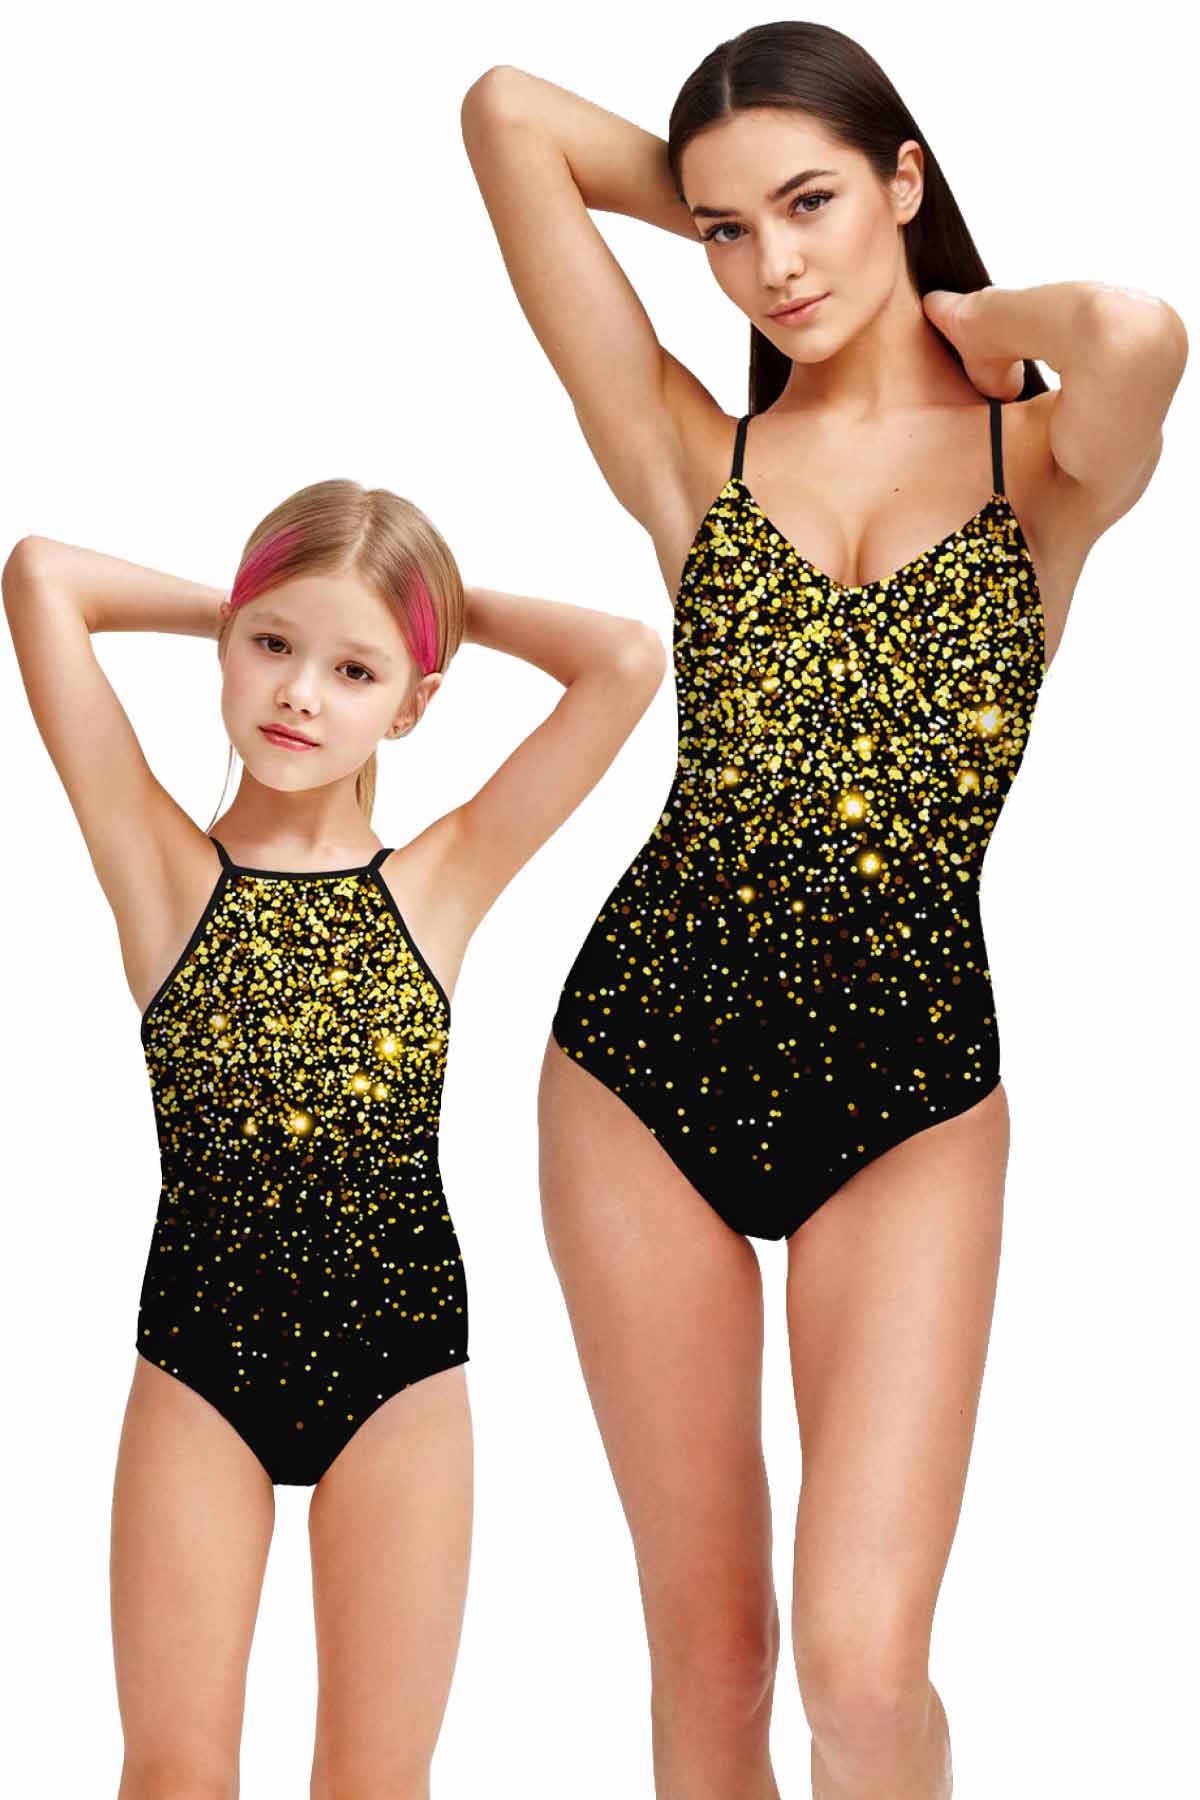 Chichi Black Gold Glitter Print One-Piece Swimsuits - Mommy and Me - Pineapple Clothing